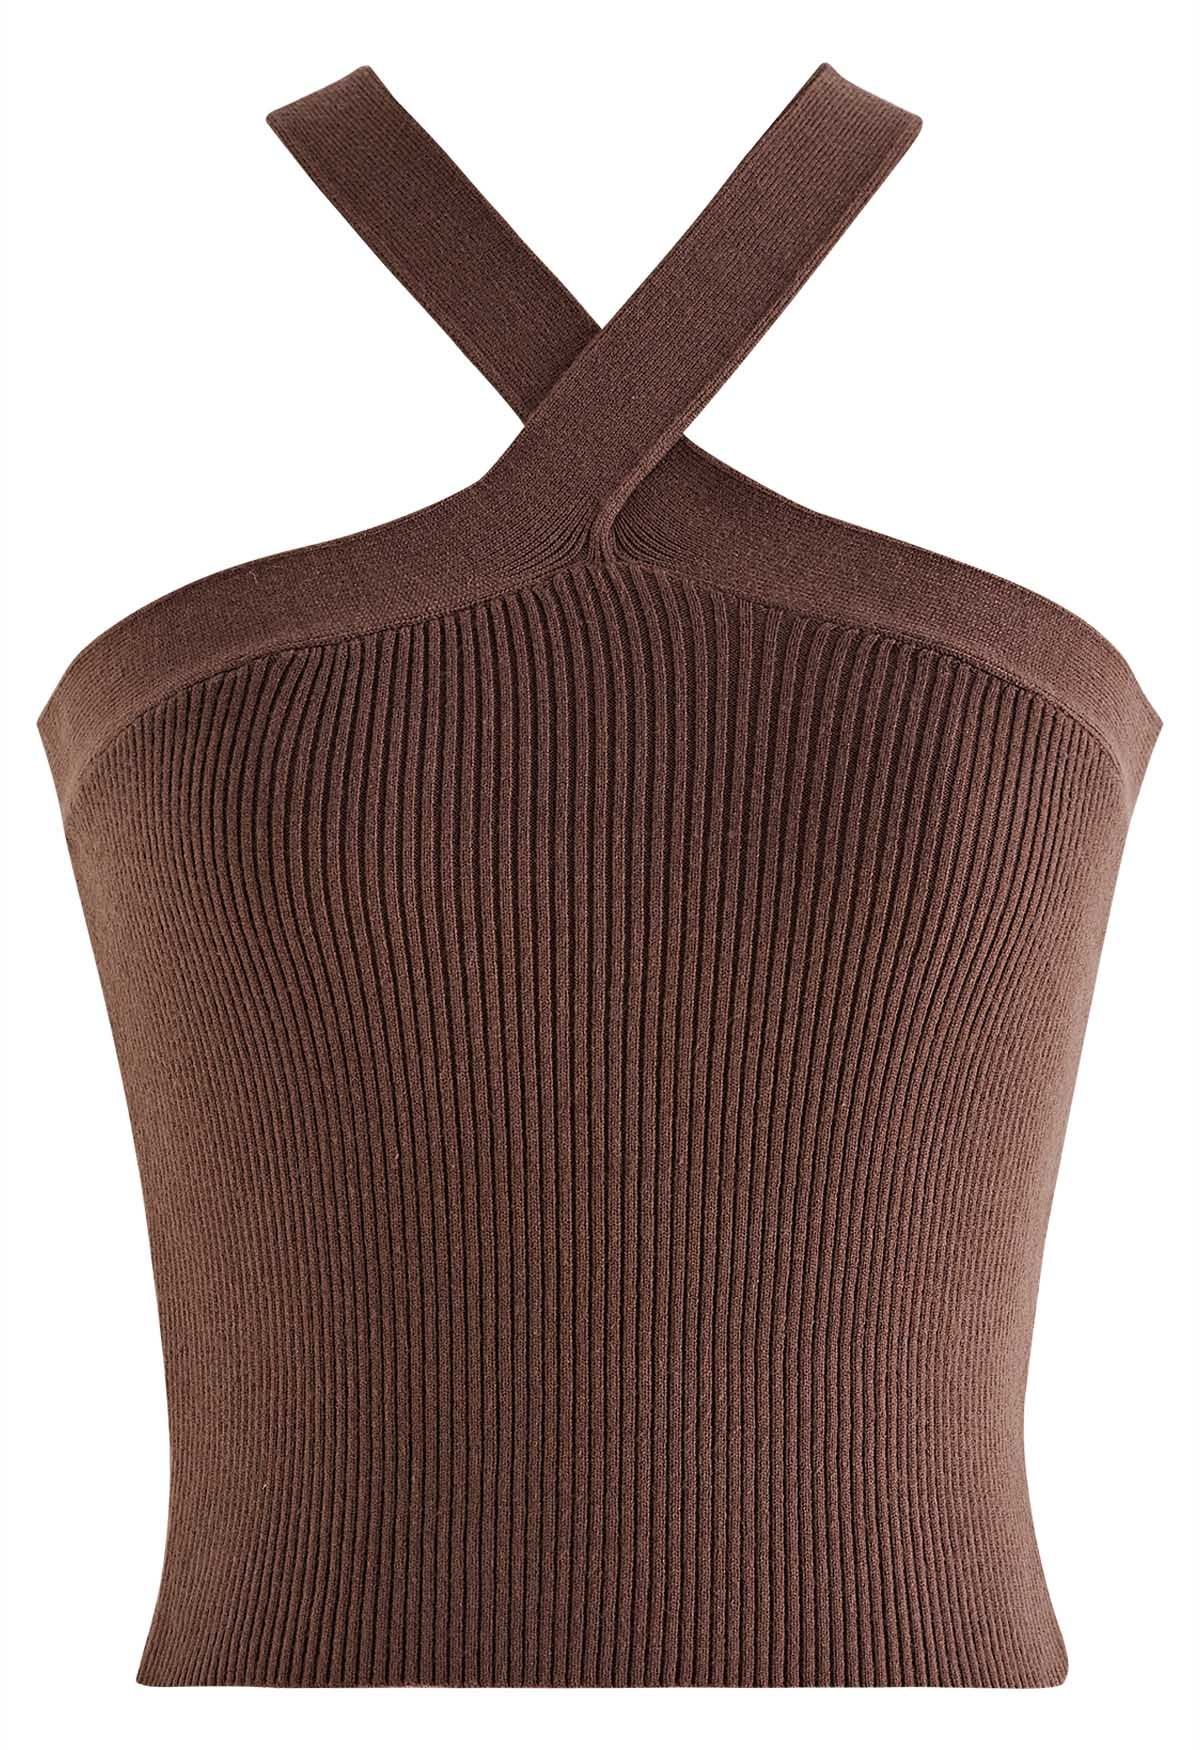 Criss Cross Straps Halter Knit Top in Brown | Chicwish